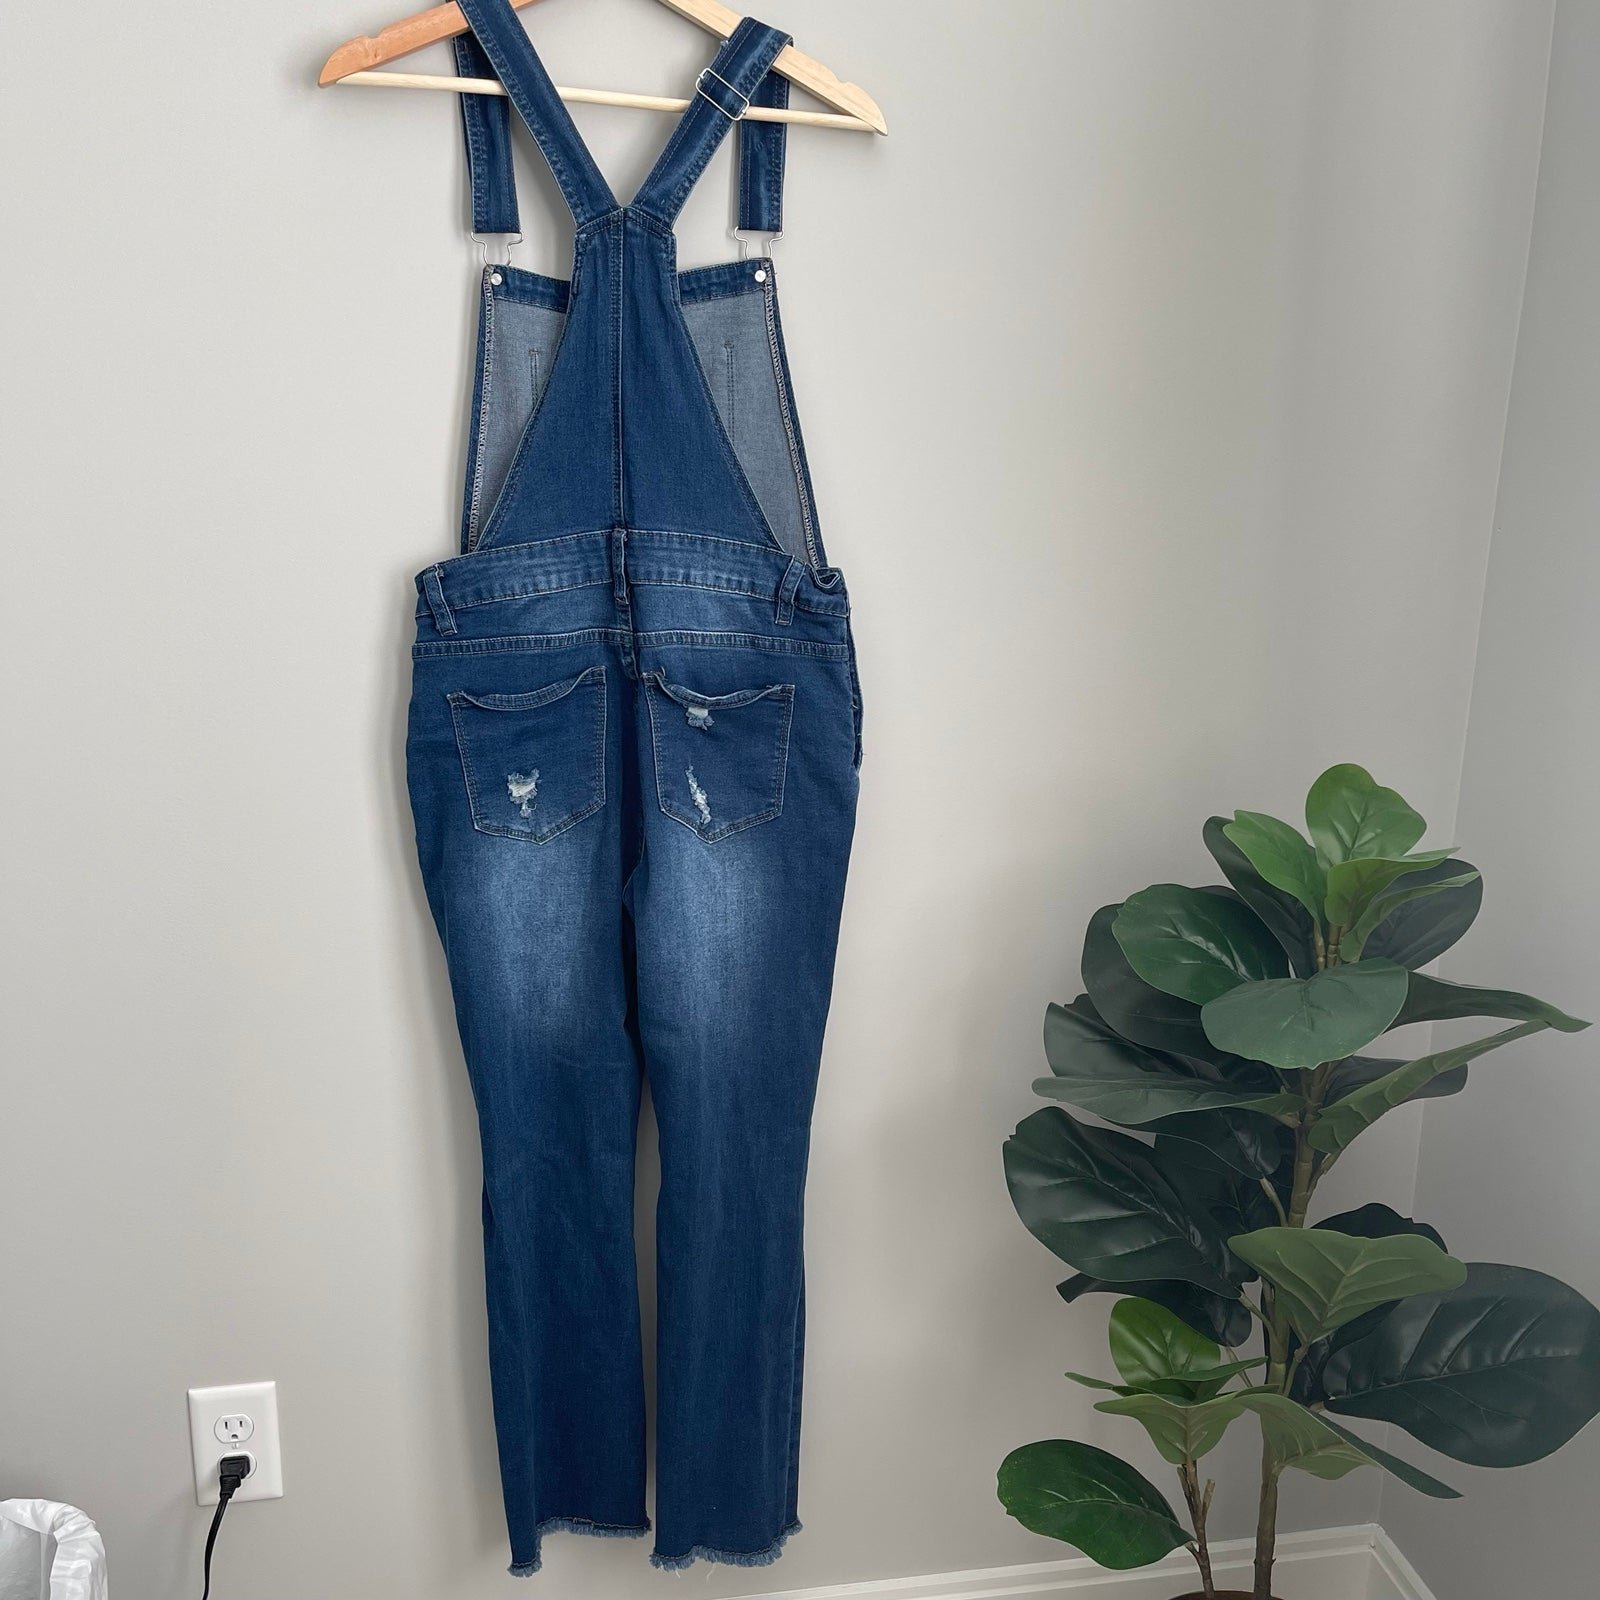 Affordable Distressed Jean Bib Overalls Small iuGXc65ac online store